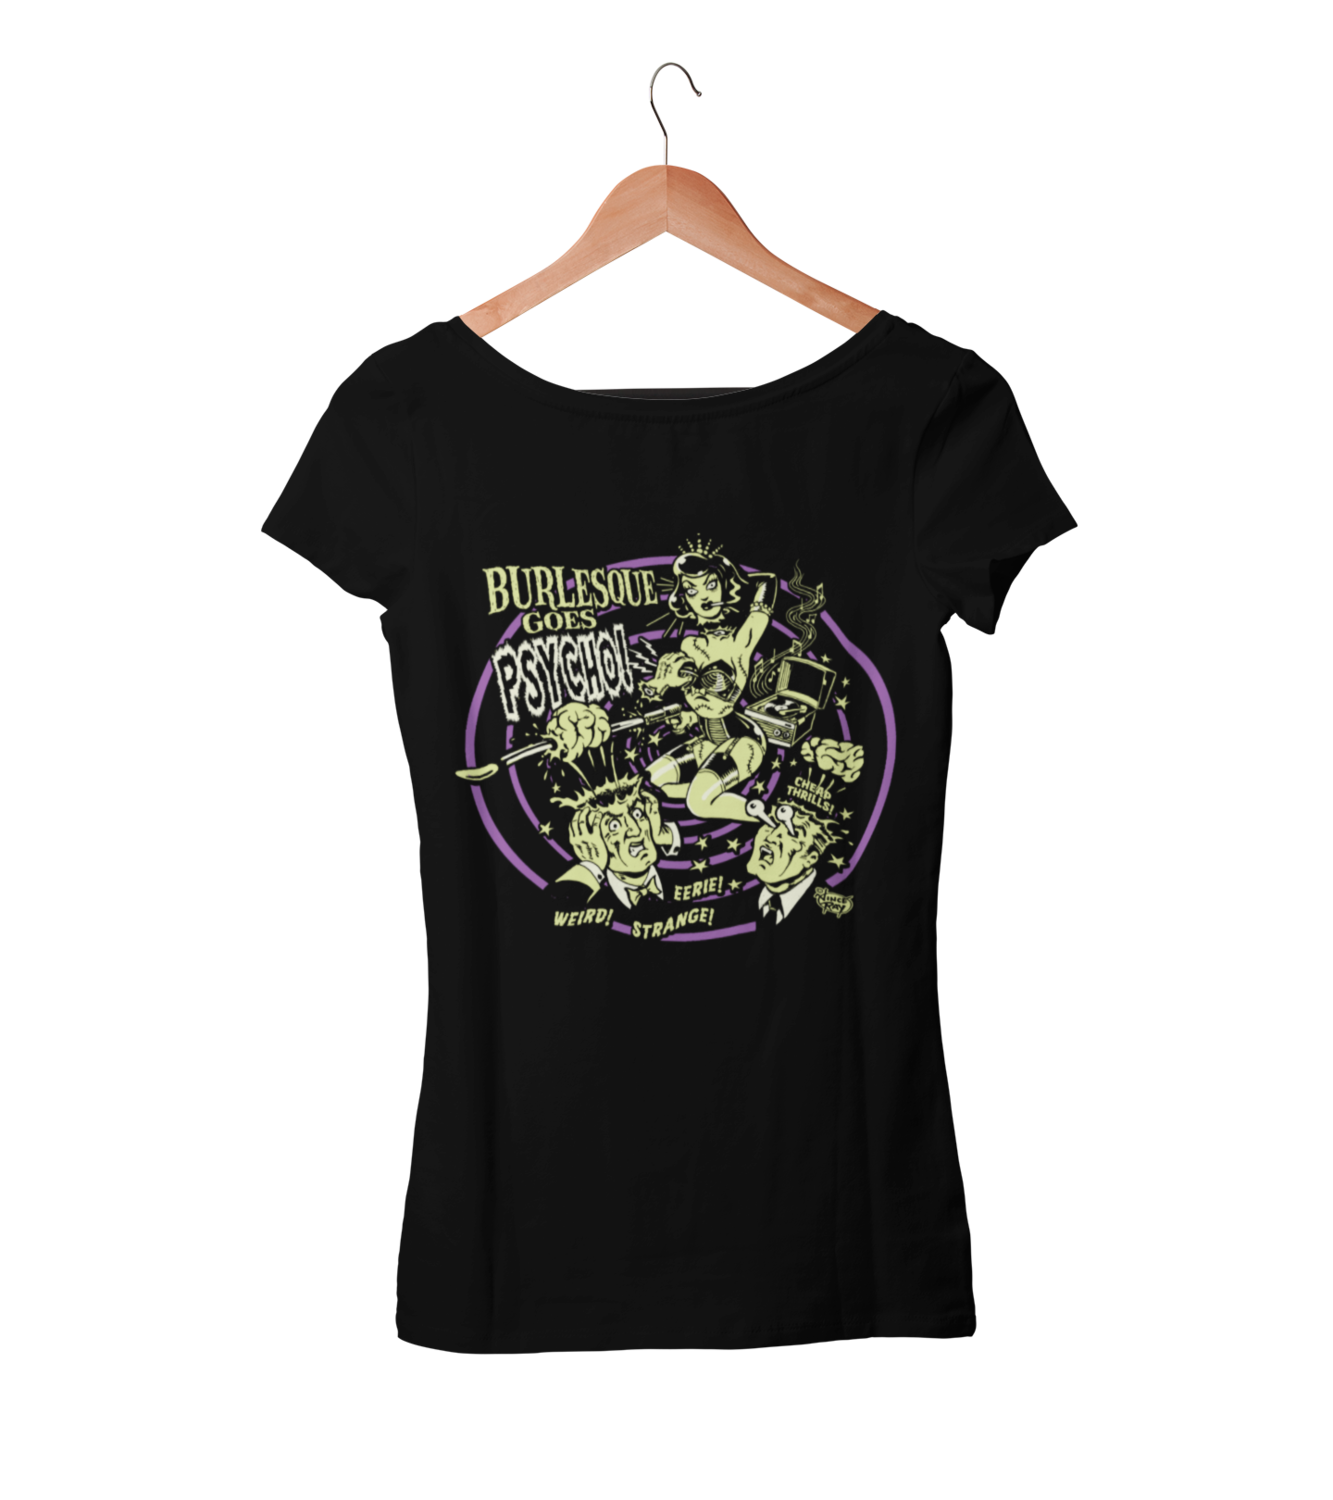 BURLESQUE GOES PSYCHO T-SHIRT WOMAN by VINCE RAY